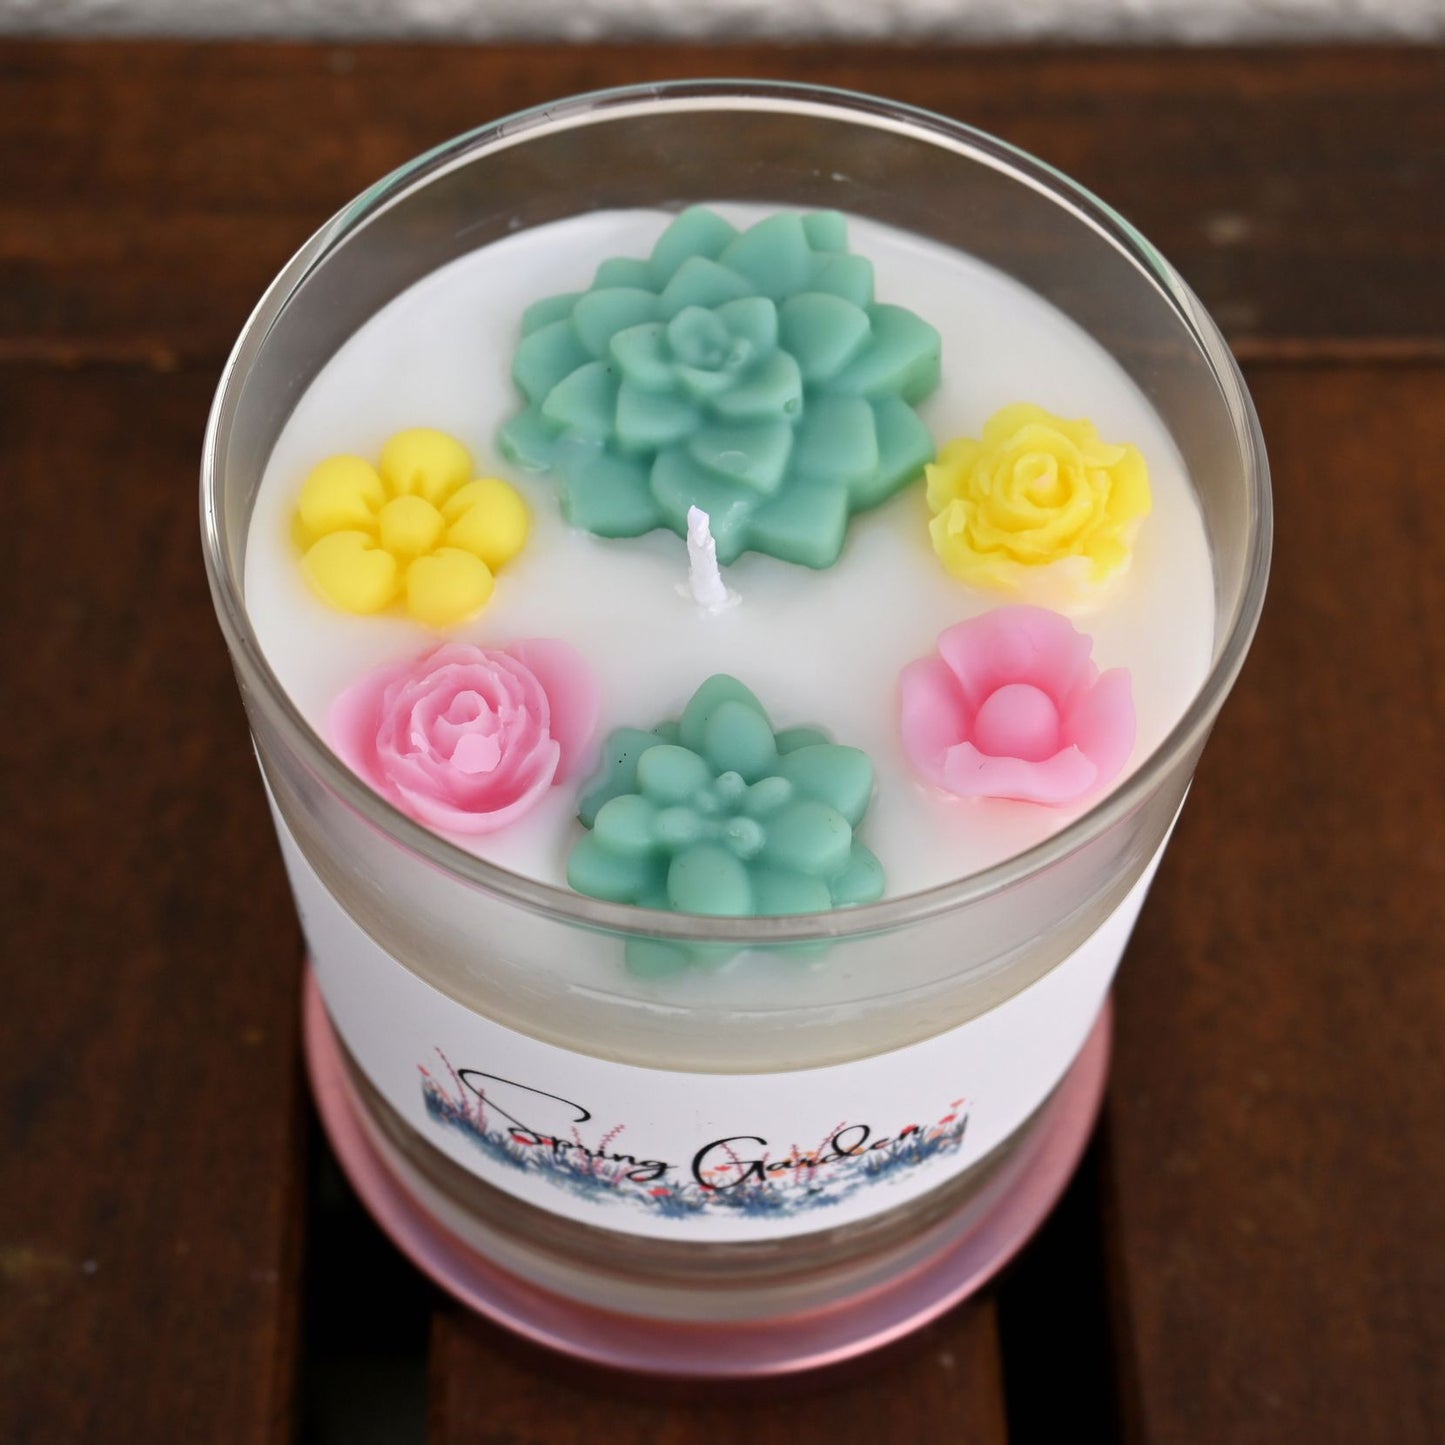 Spring Garden Candle - Rosemary & White Sage Candle